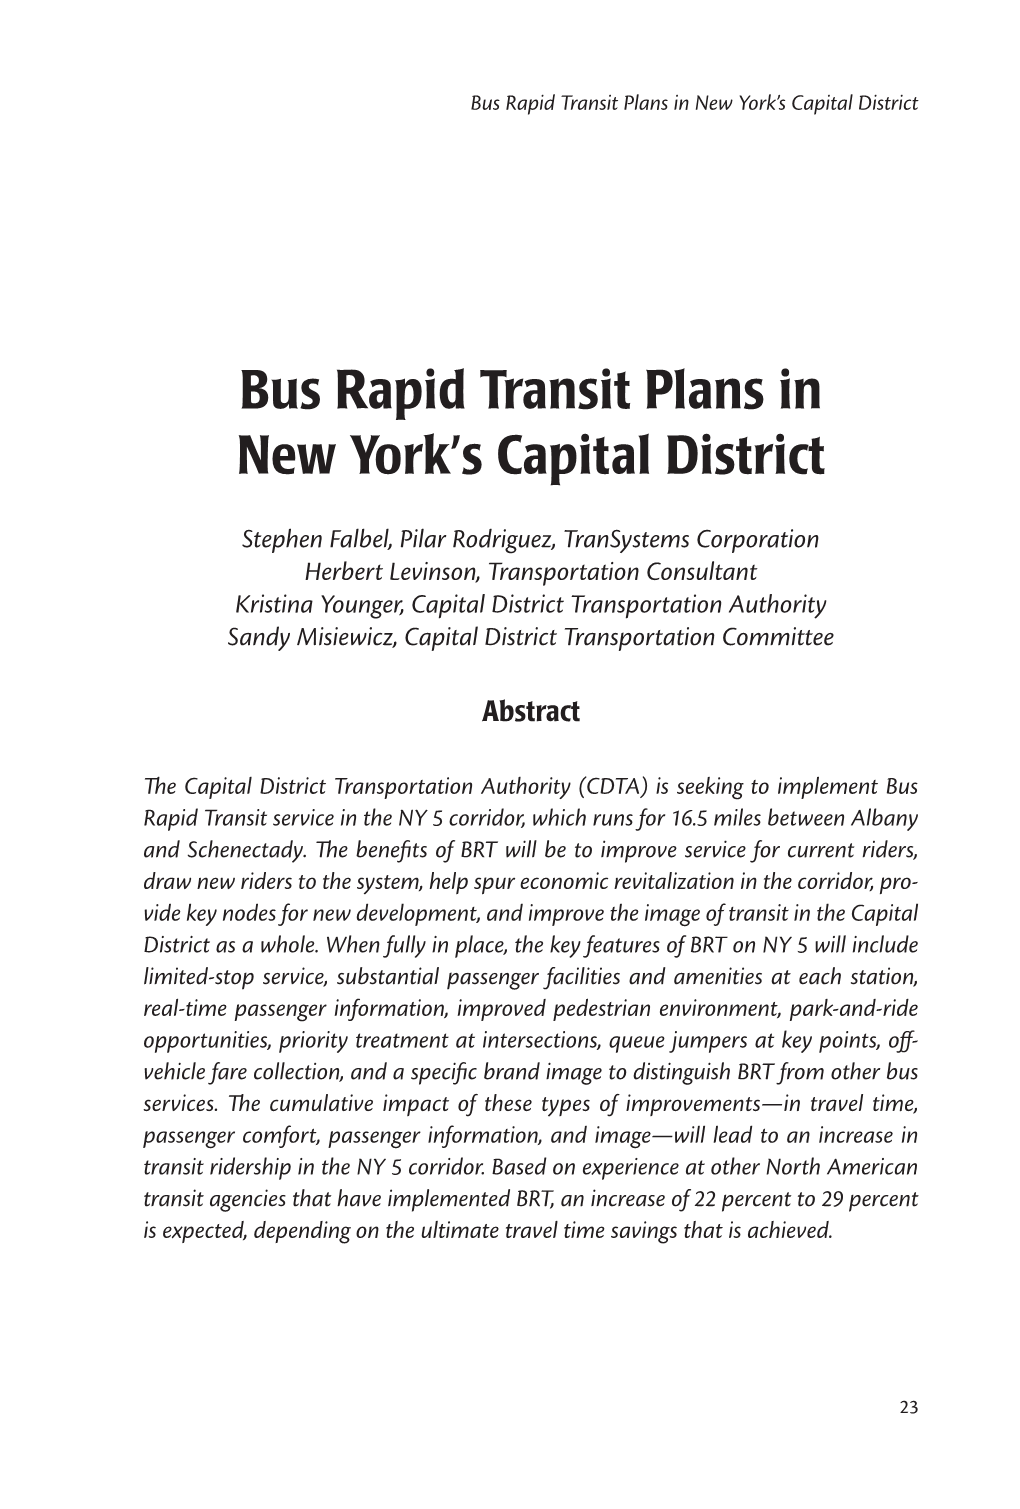 Bus Rapid Transit Plans in New York's Capital District